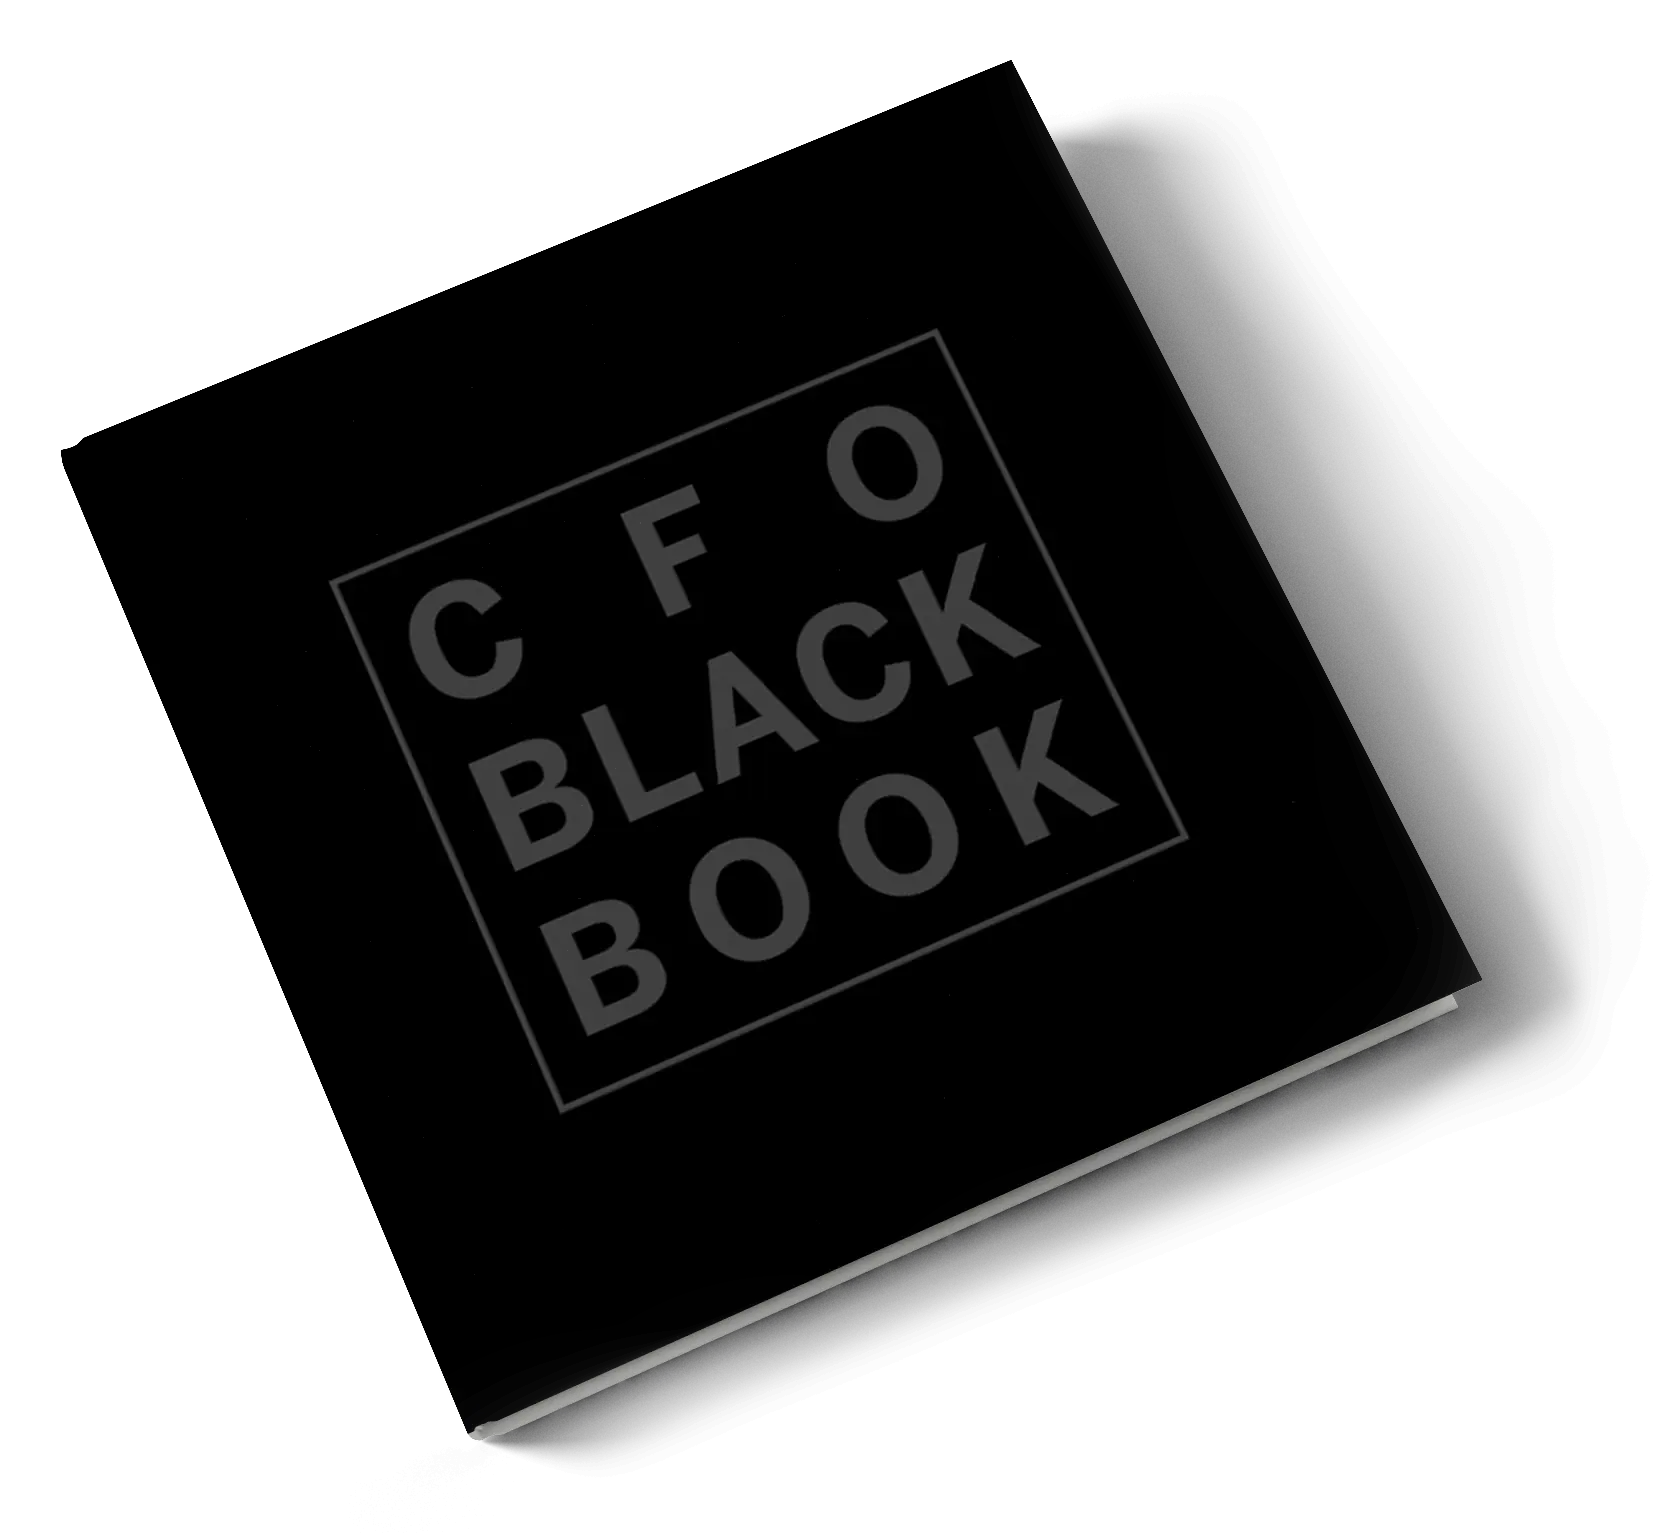 Exclusive CFO Black Book for financial decision-makers